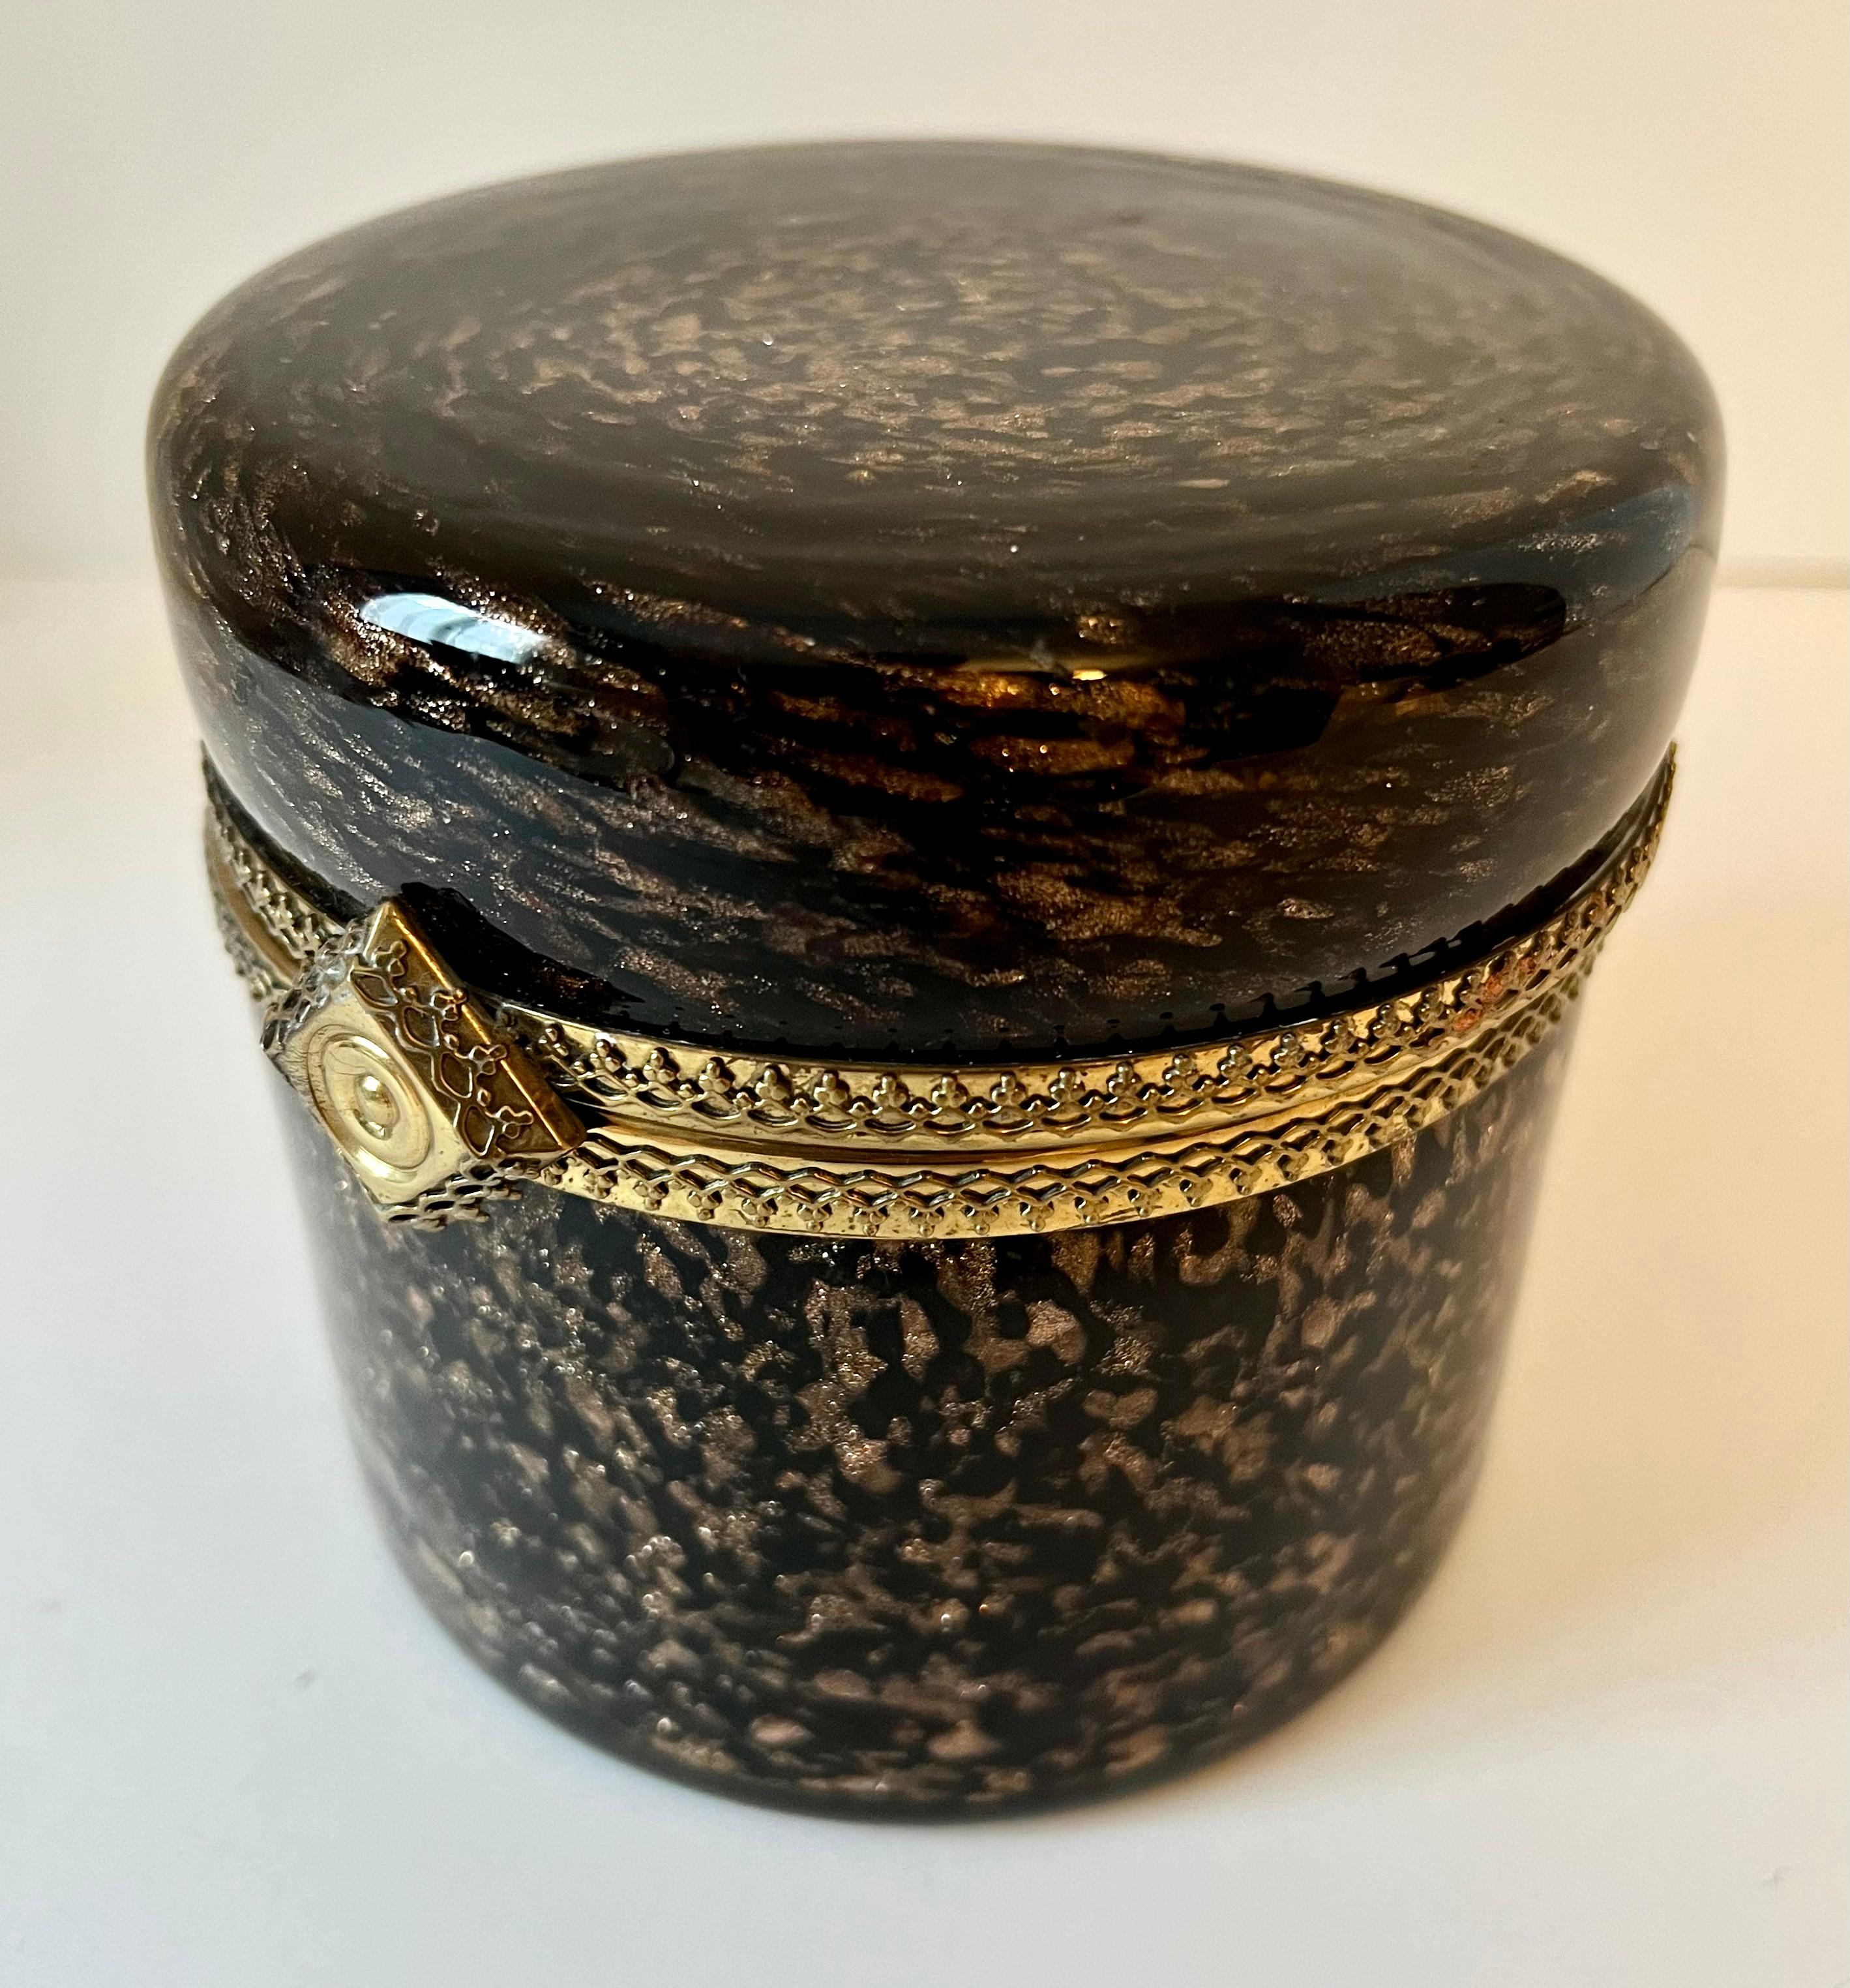 A stunning Murano glass hinged top box with a tortoise style glass design and gold shimmering flecks. The piece is a compliment to any vanity or dressing table, bathroom. Could also be used in the main room or even bar. a wonderfully sophisticated